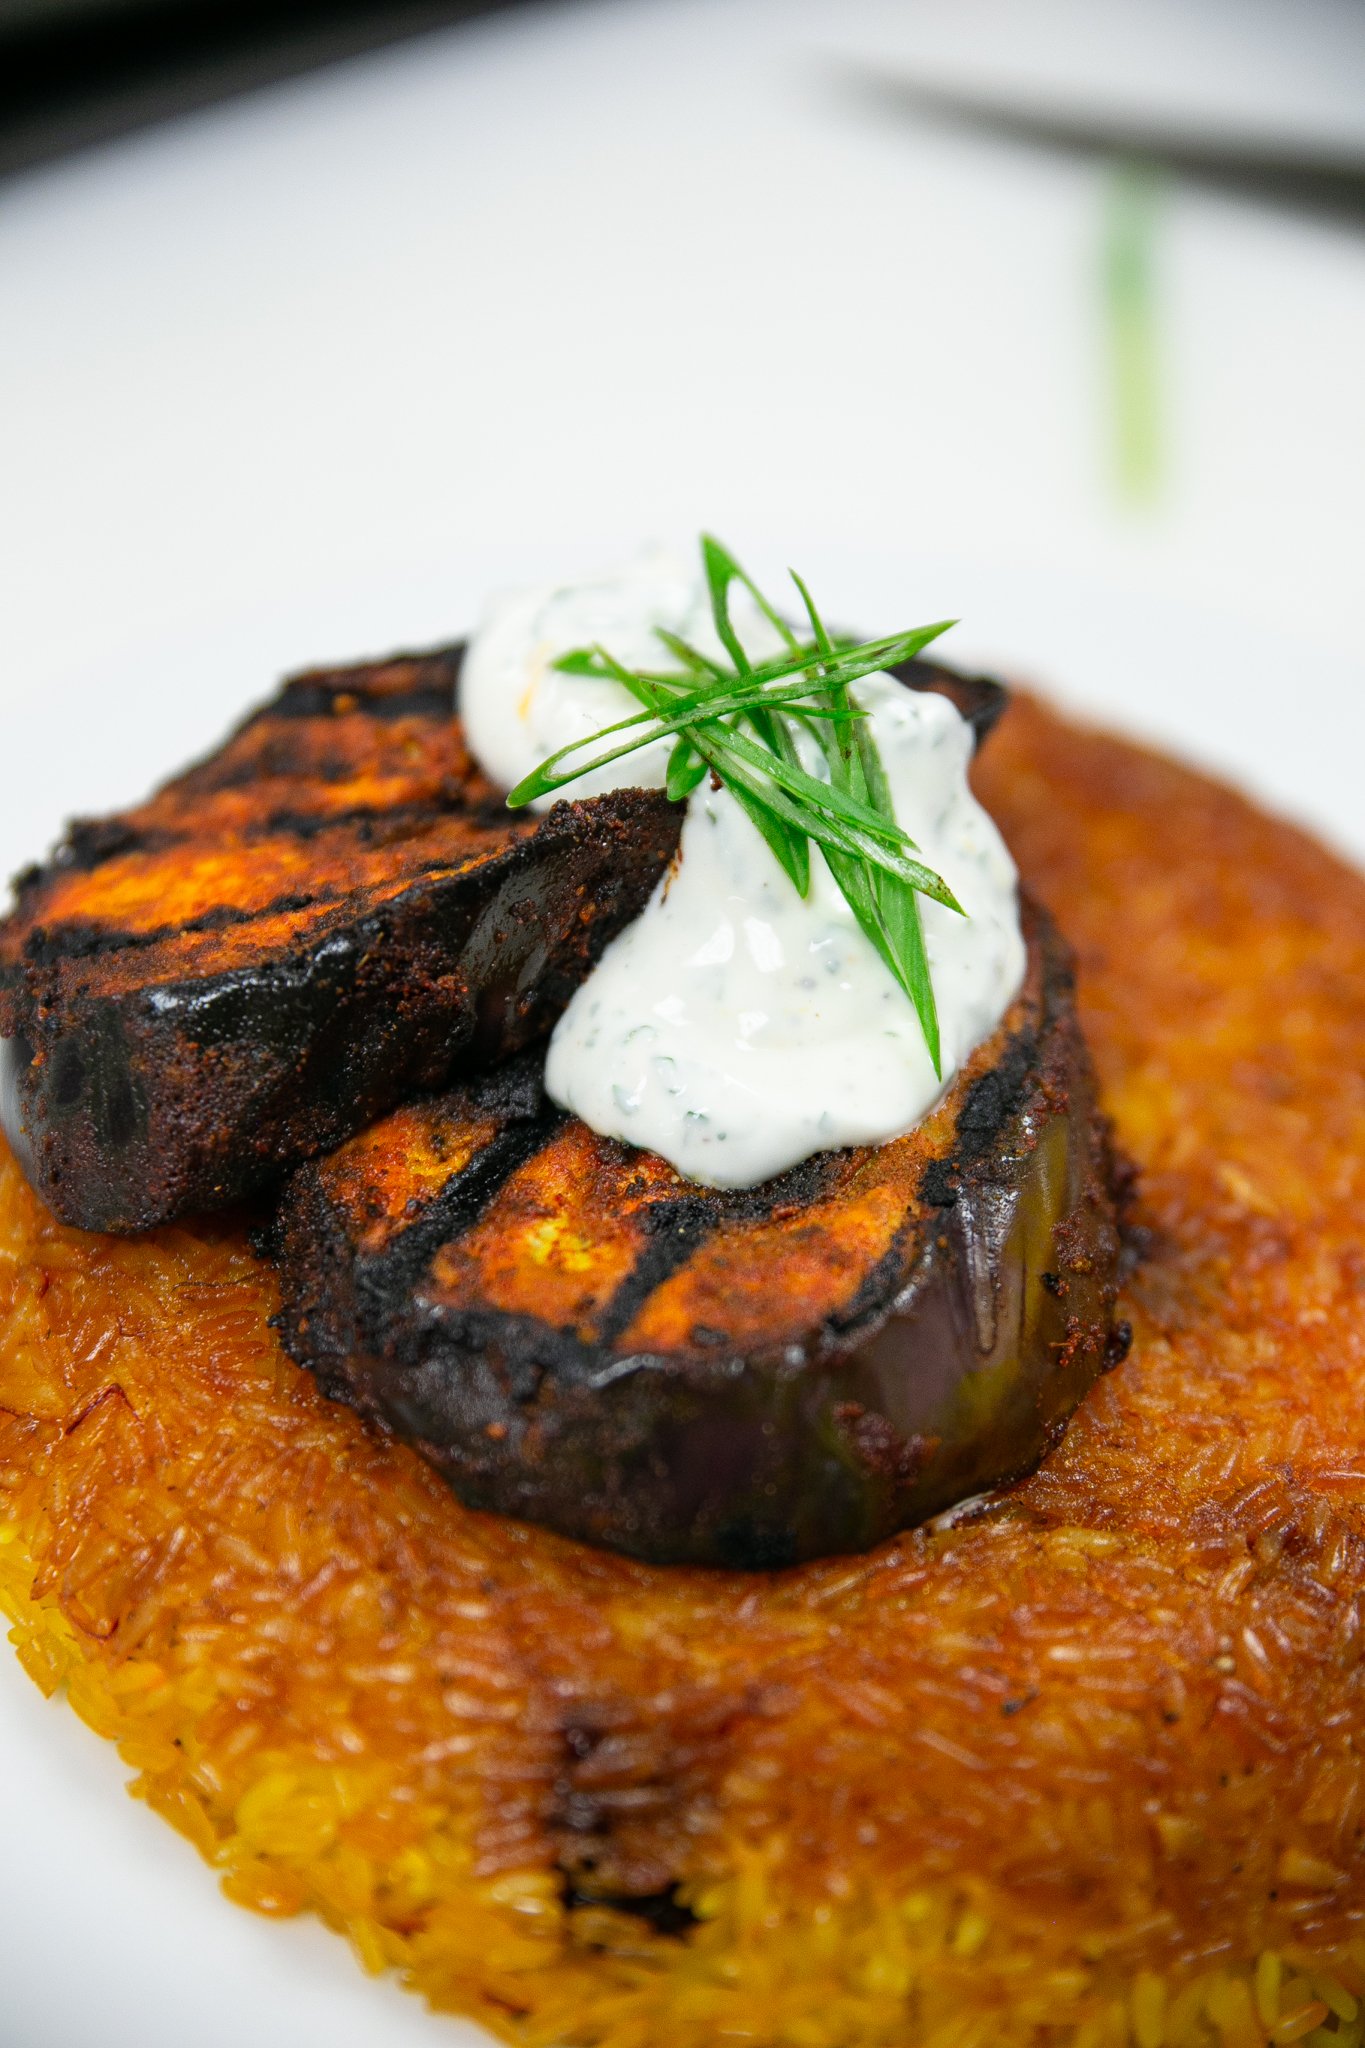  A vegetarian wedding dish, grilled eggplant, is plated atop a bed of fried rice and garnished with a tzatziki sauce and scallions.  